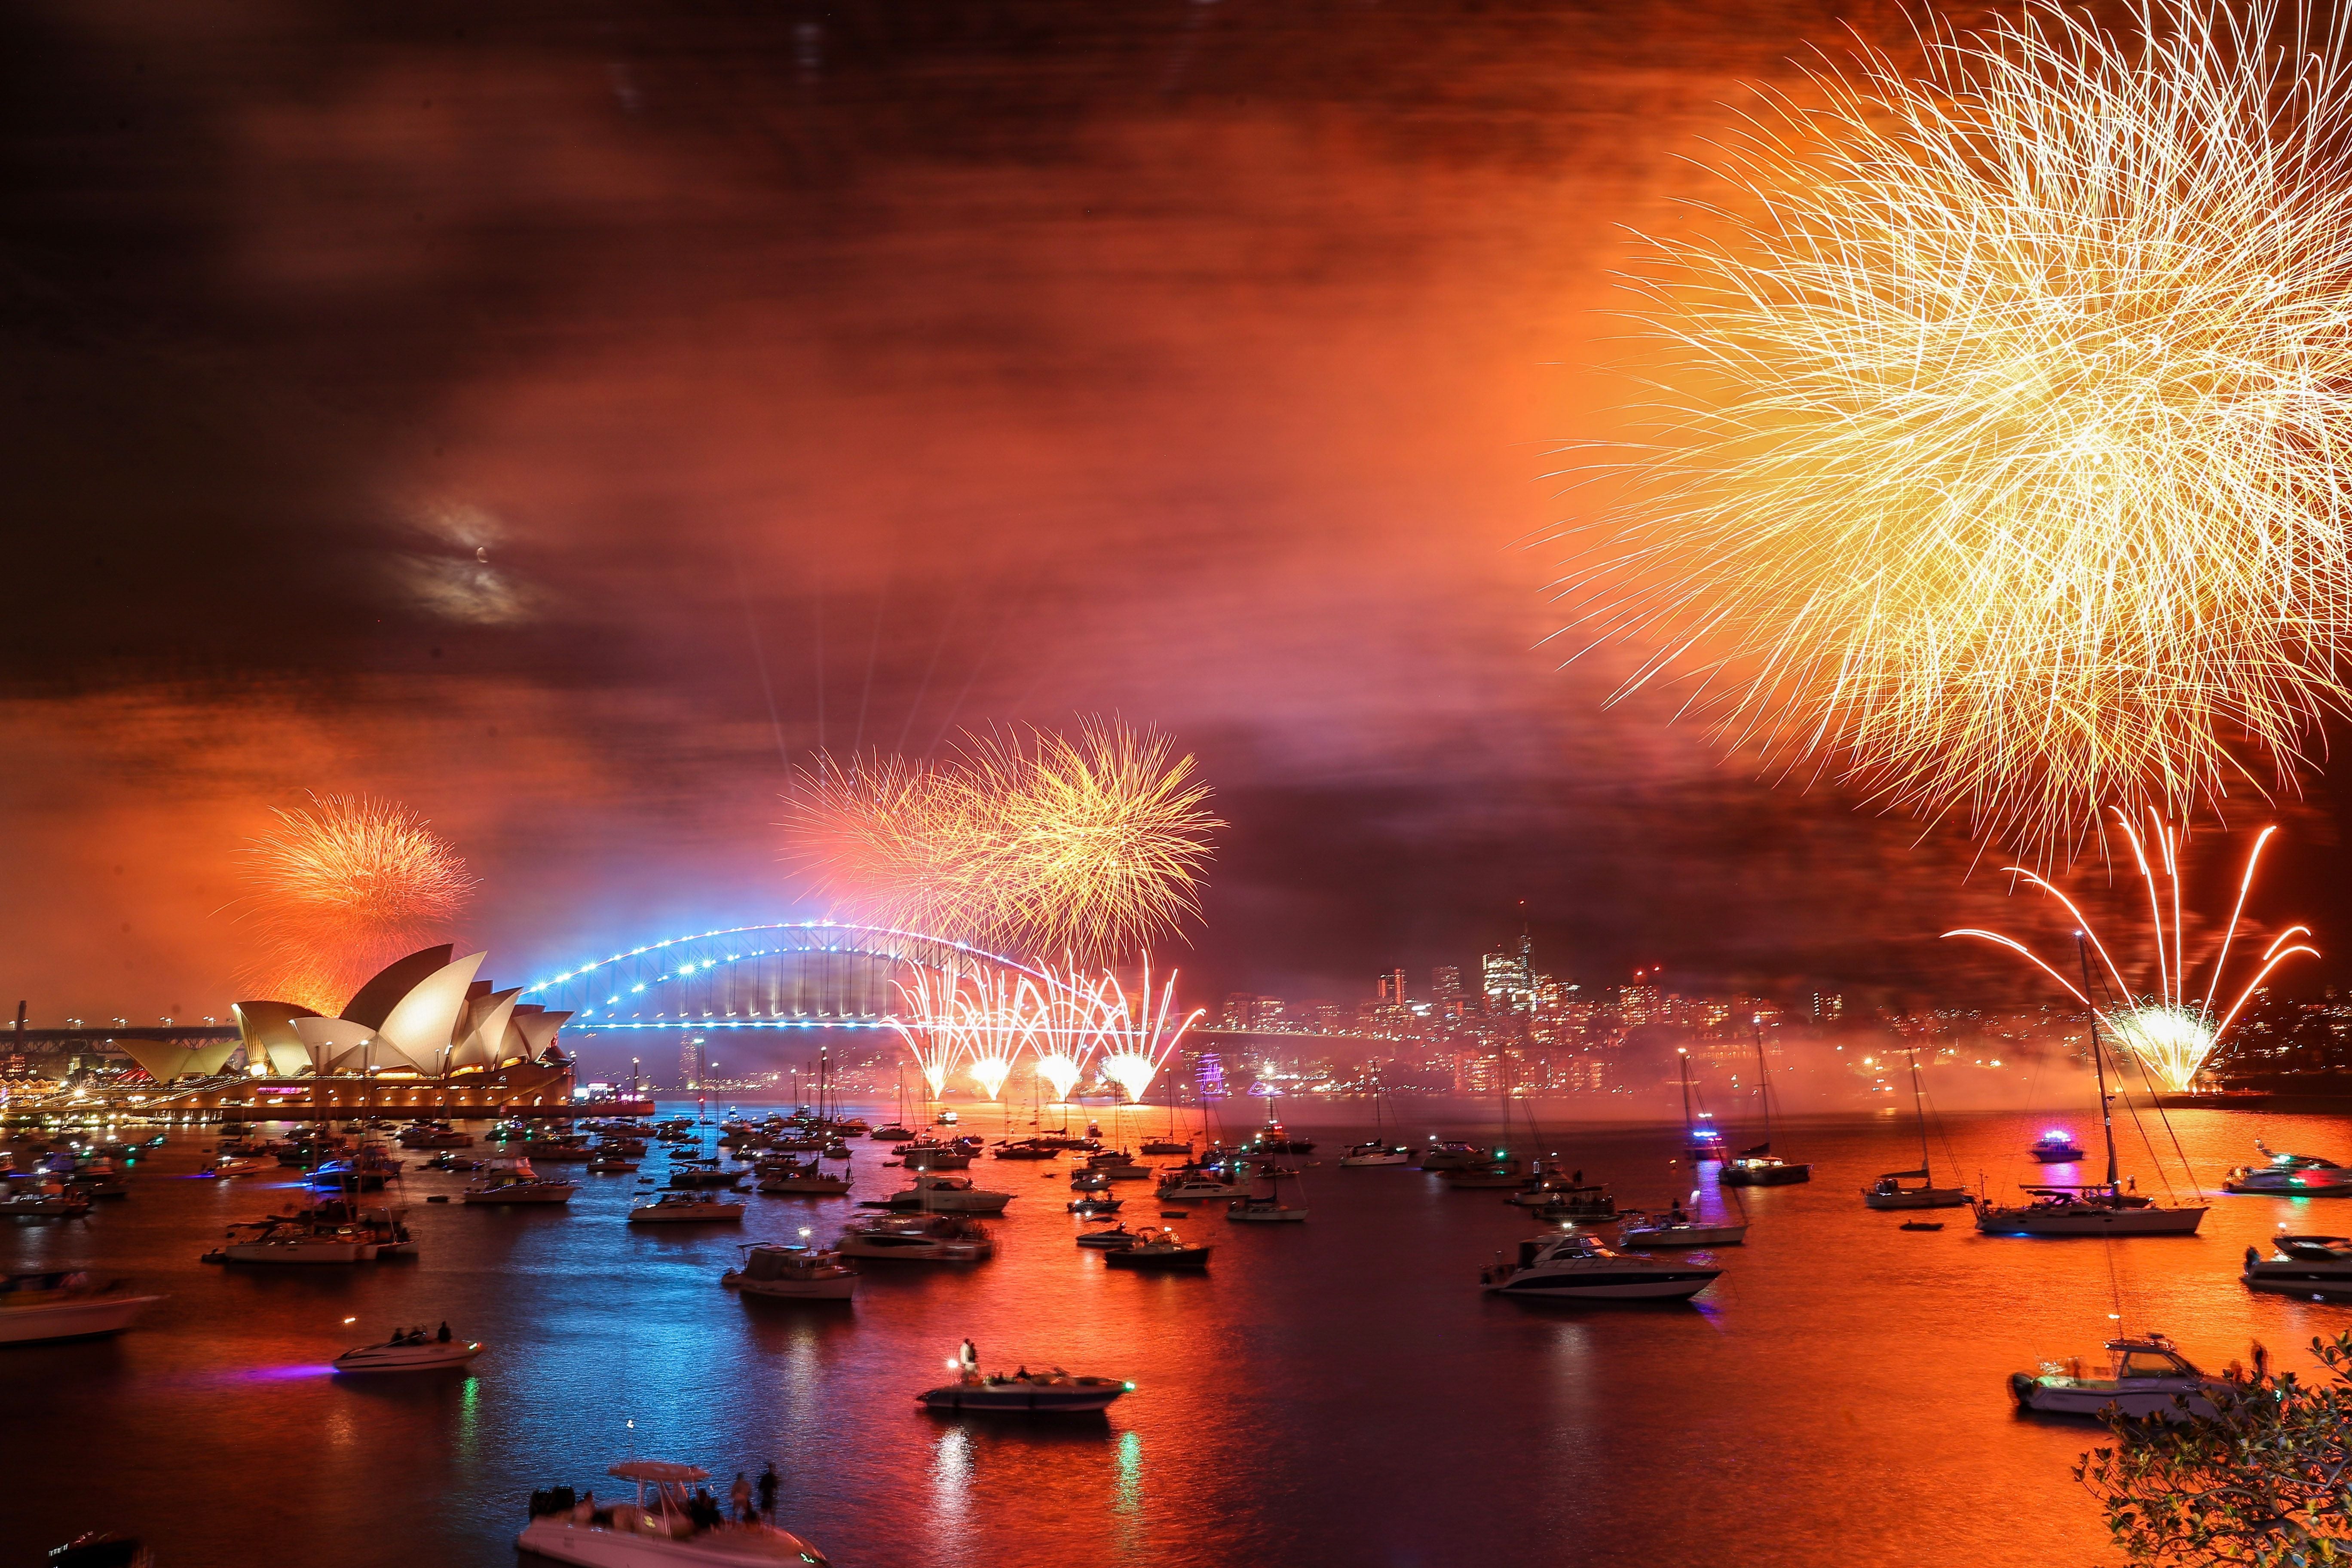 Fireworks light up the sky over Sydney Harbour Bridge during New Year’s Eve celebrations